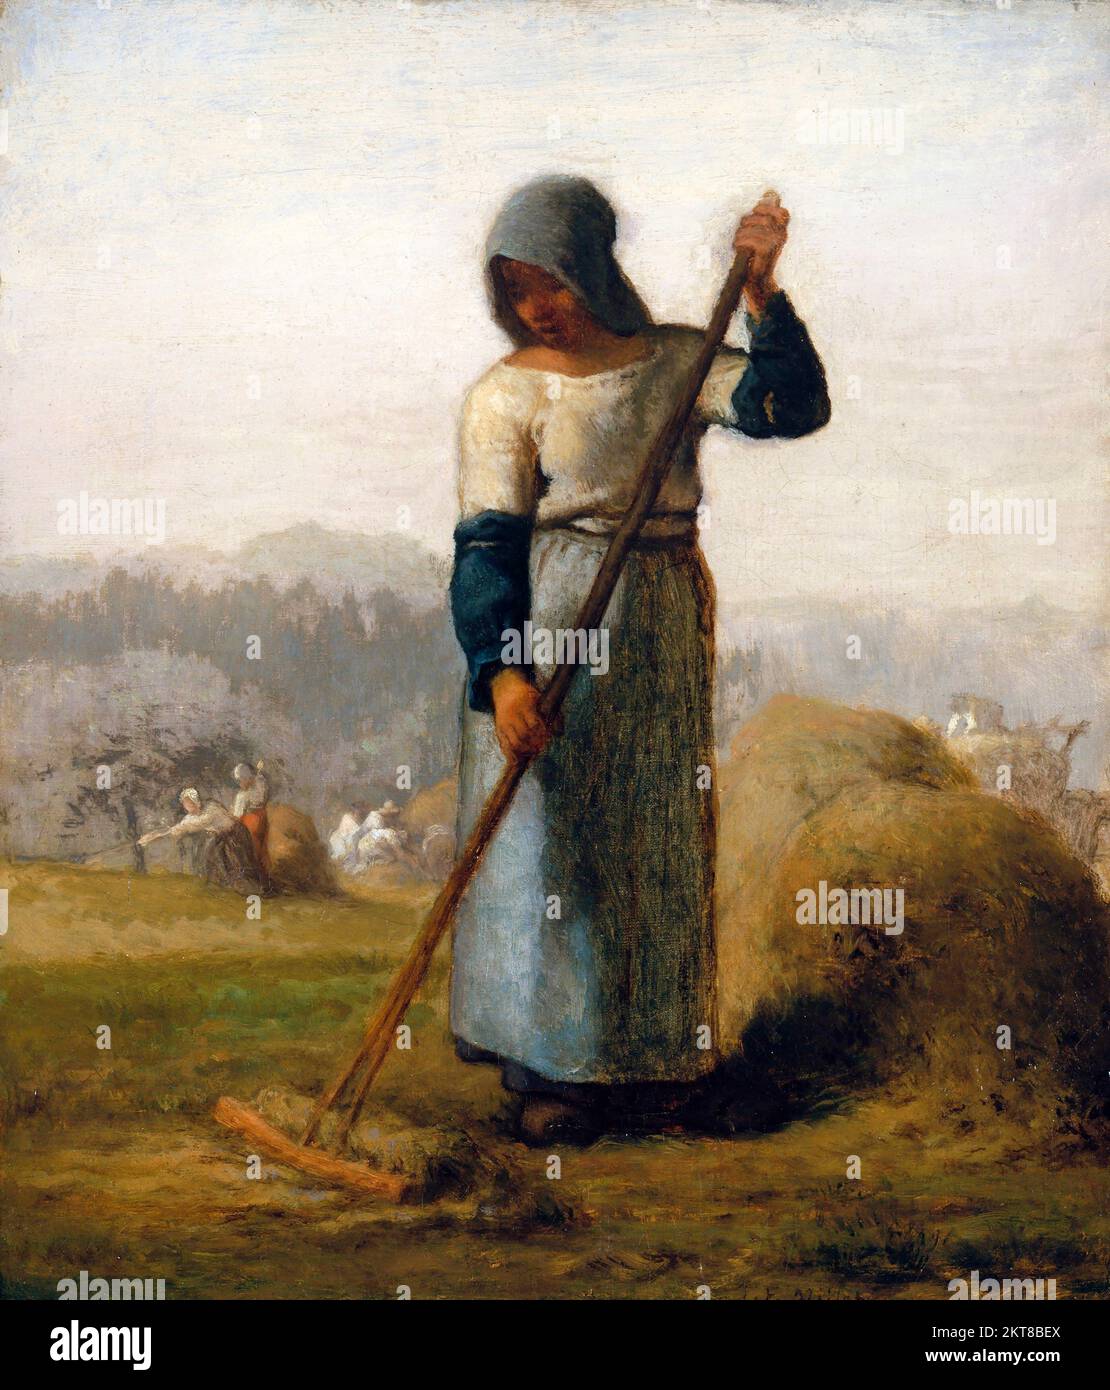 Woman with a Rake by Jean-Francois Millet (1814-1875), oil on canvas, c. 1856/7 Stock Photo